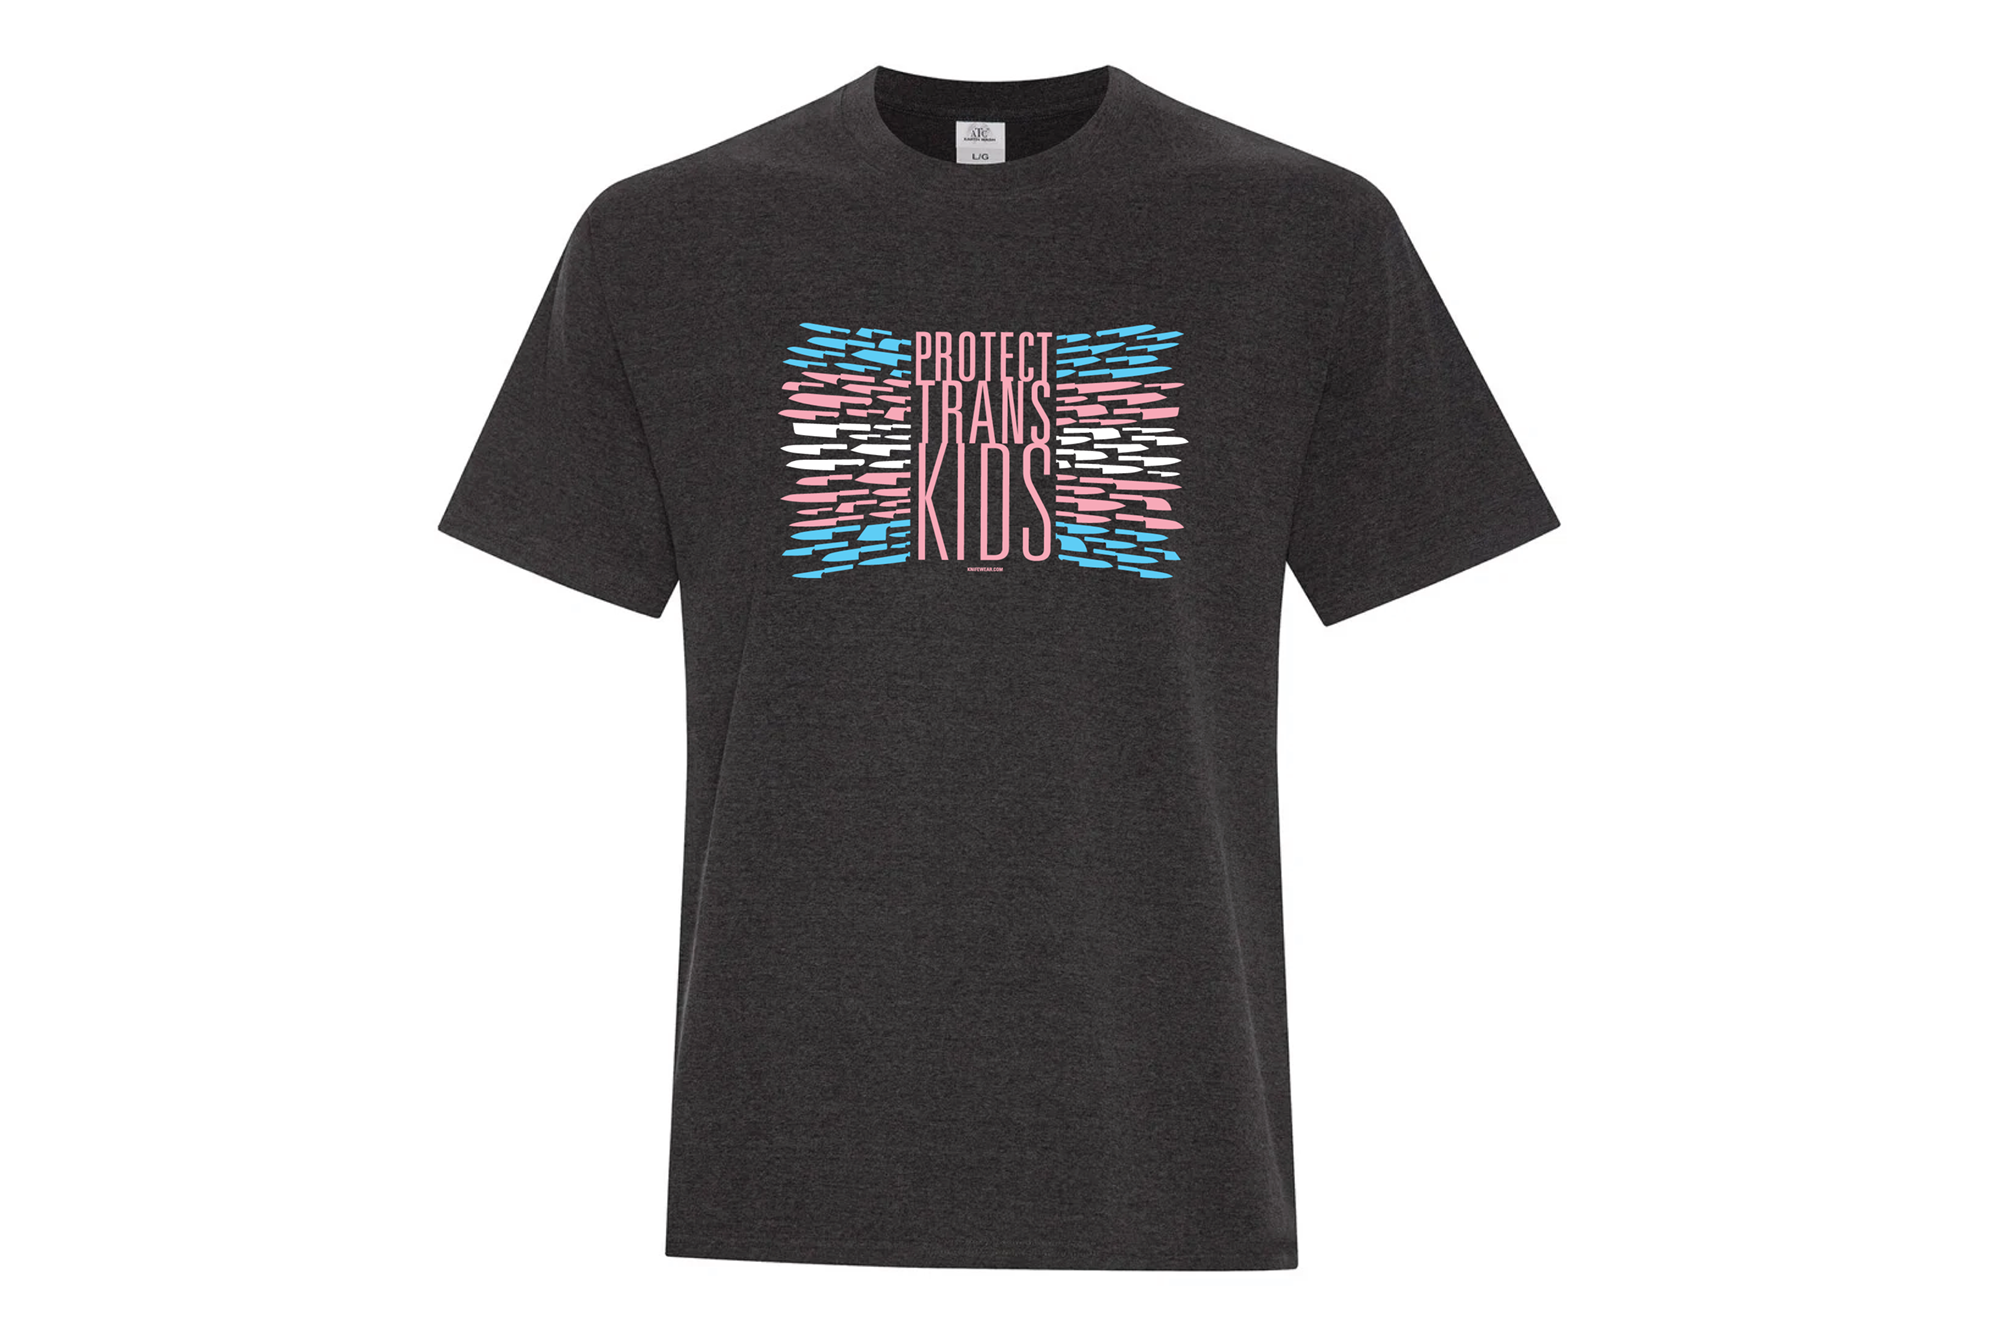 Protect Trans Kids T-Shirts Available for Pre-Order